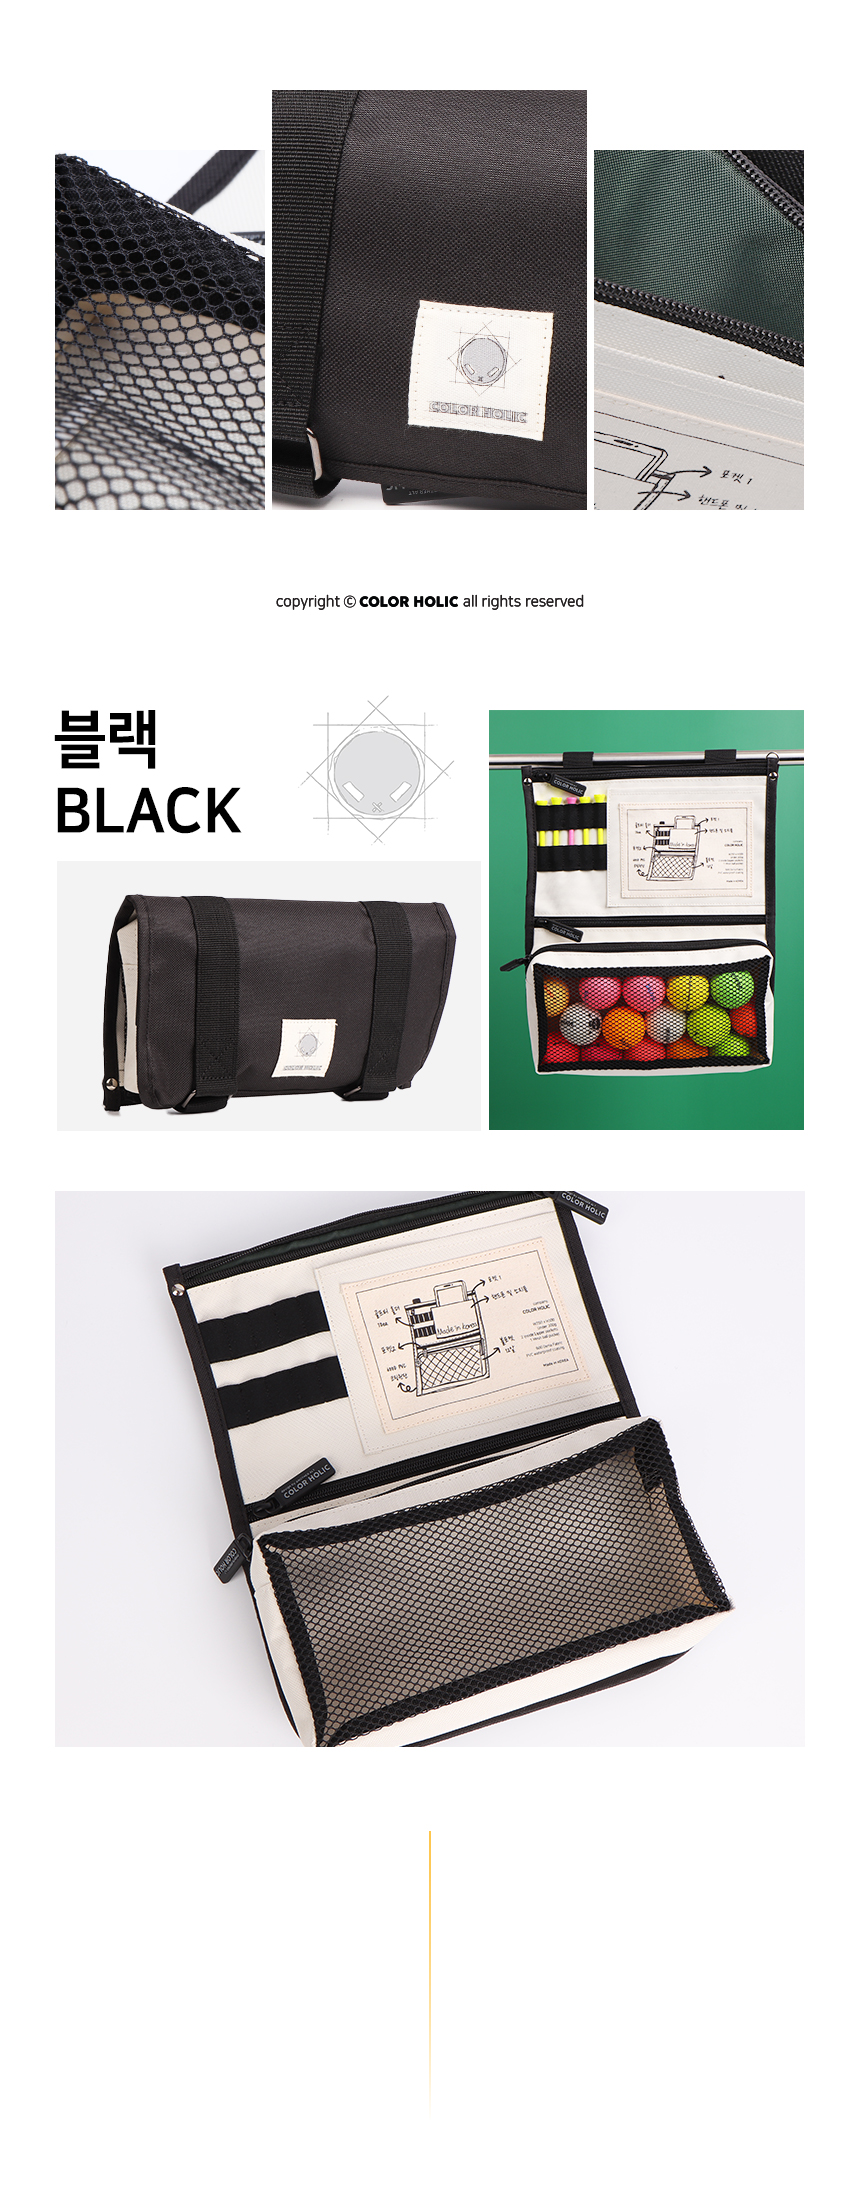 colorholic_golfcart_organizer_pouch_rok_09_page_title_story_box2.jpg